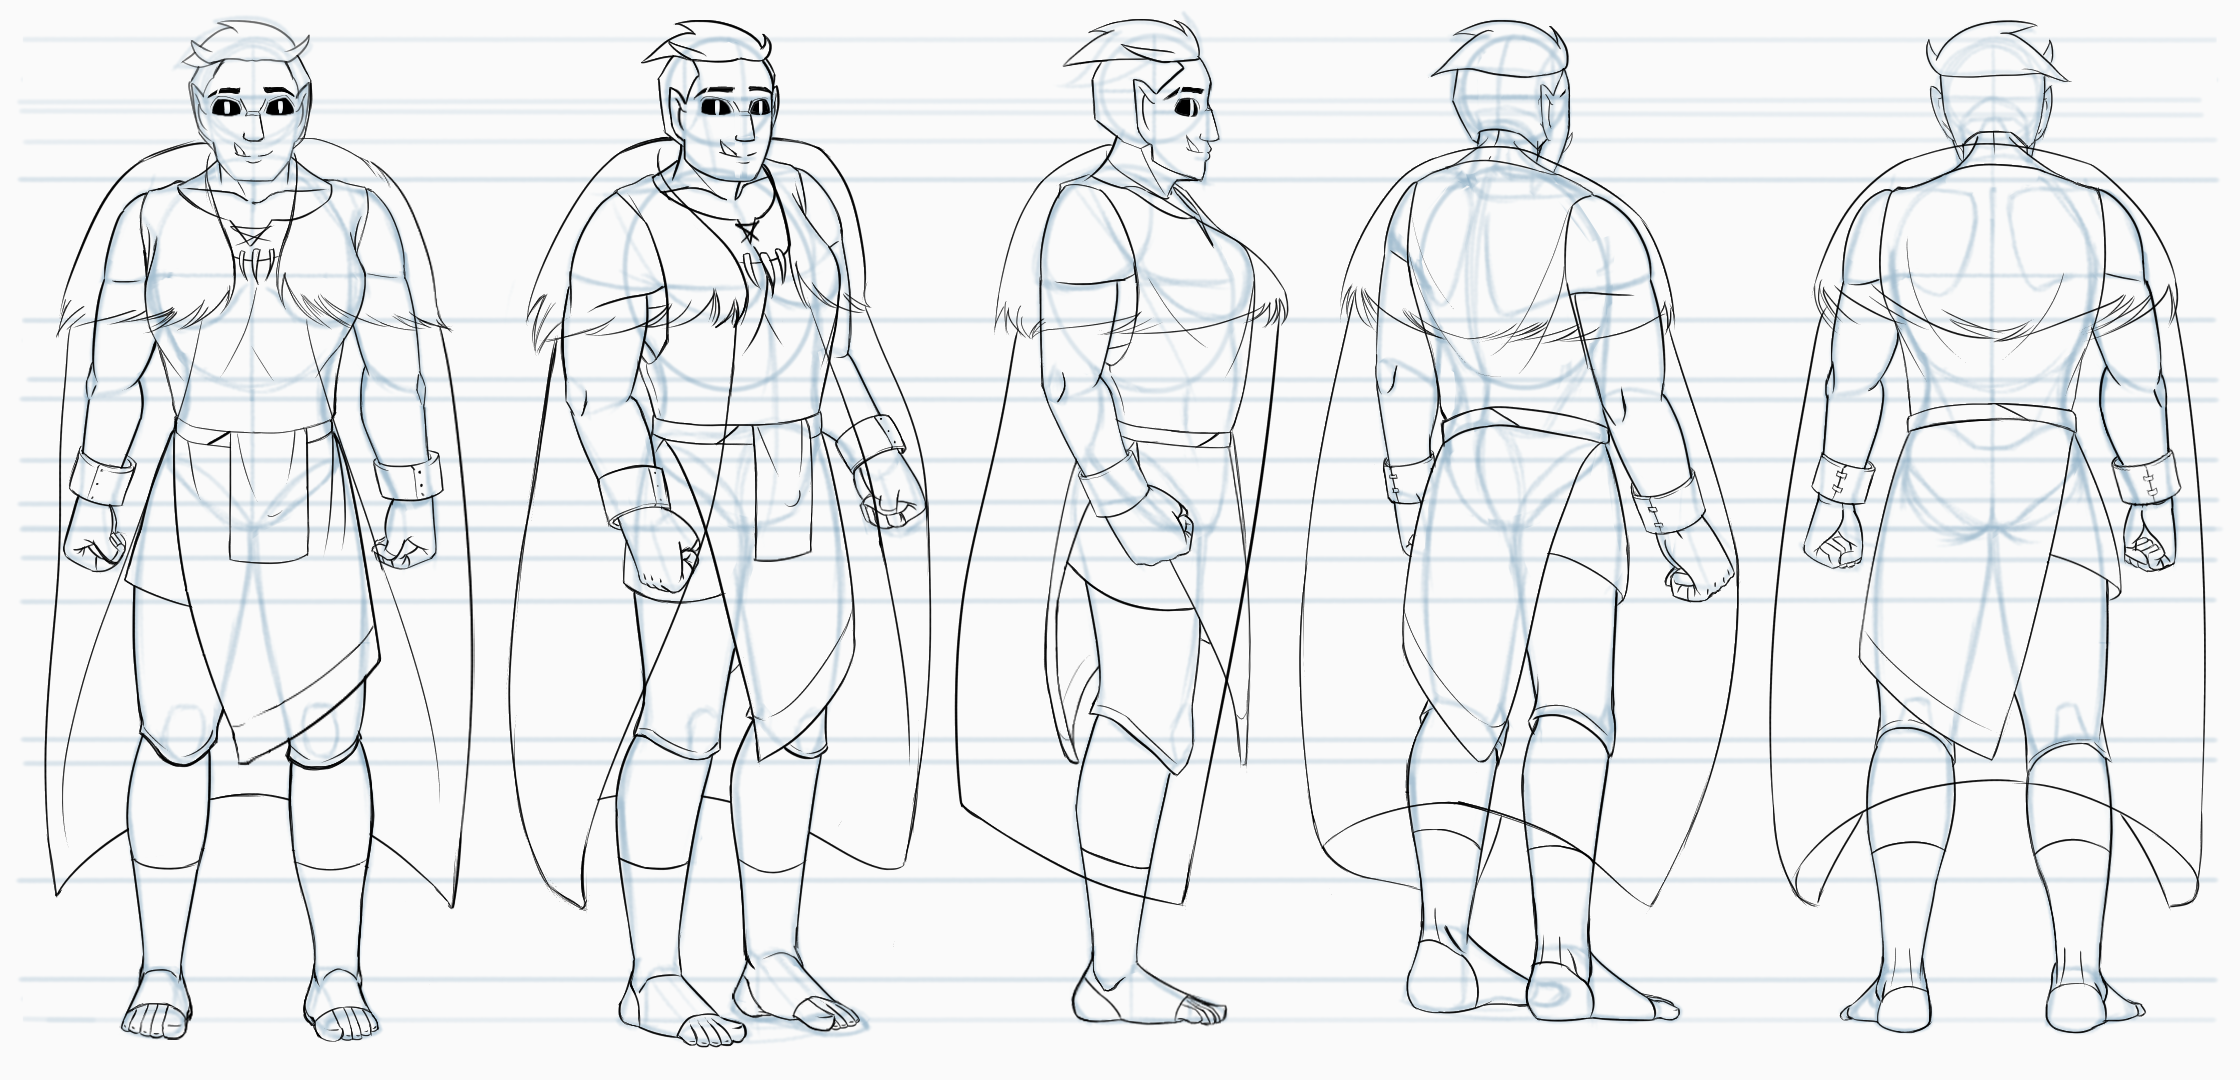 71. Character Design Document